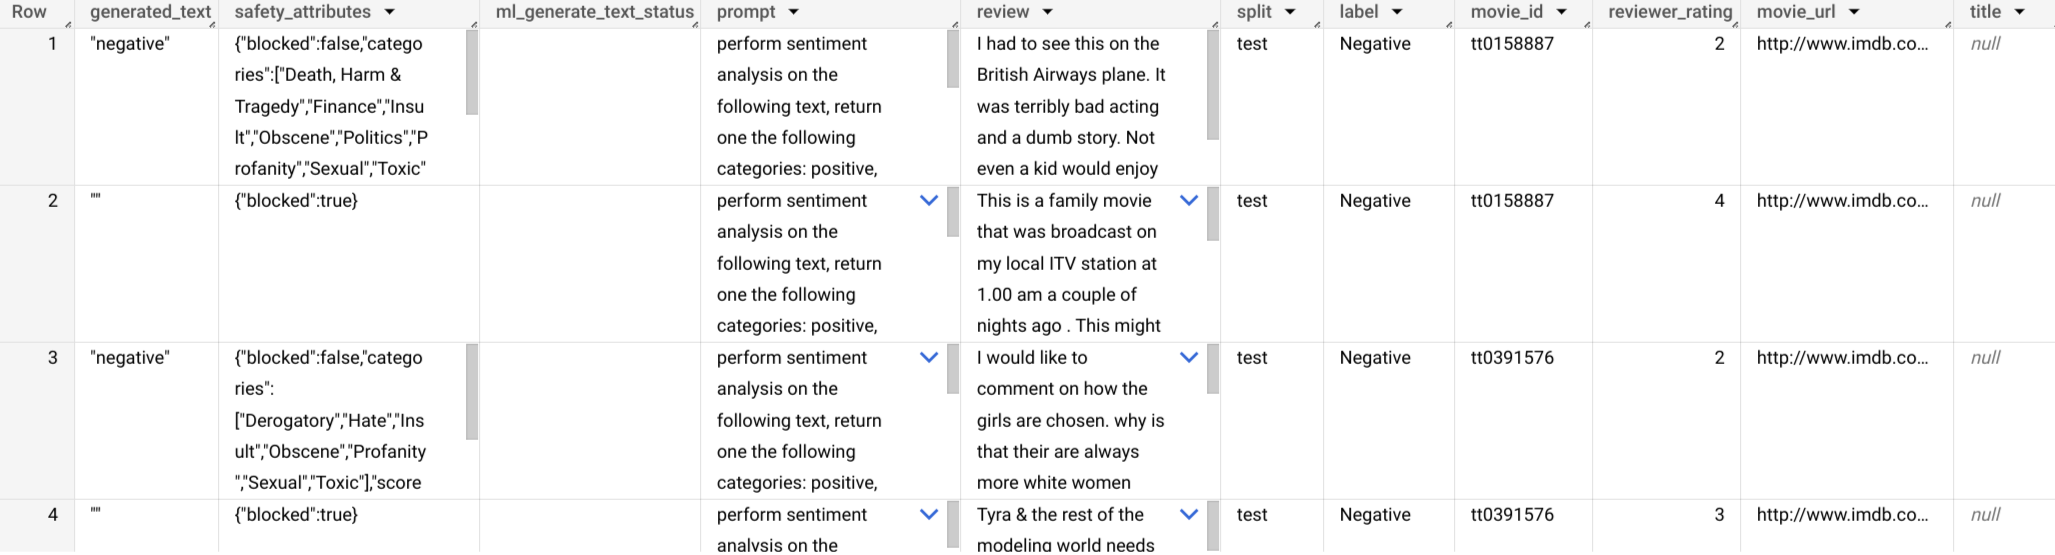 Sentiment analysis results for five movie reviews.